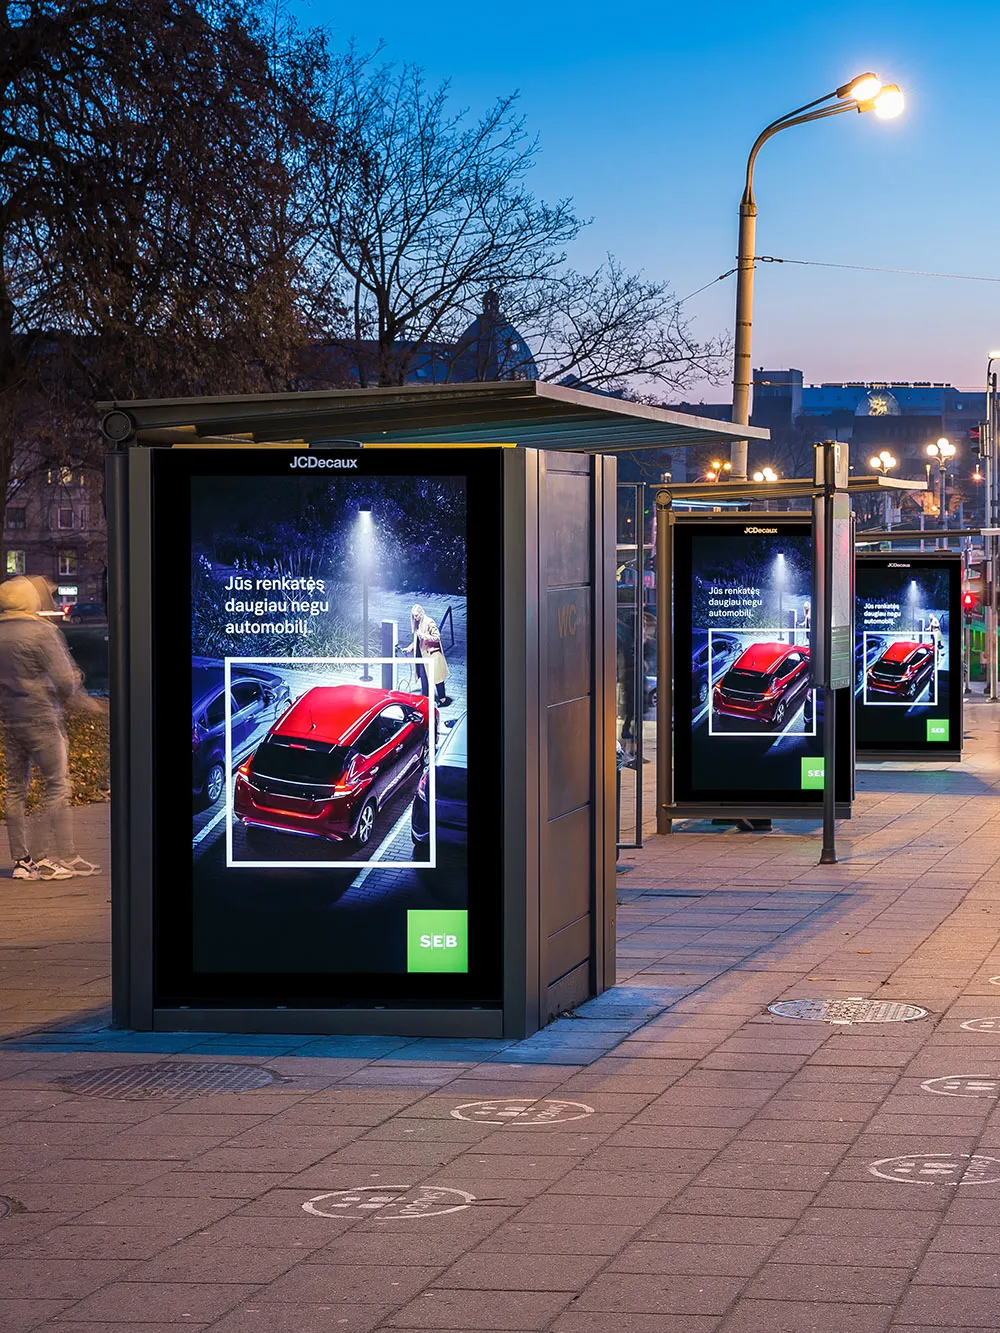 Several bus shelters in Vilnius, Lithuania with BoldVu® displays on them